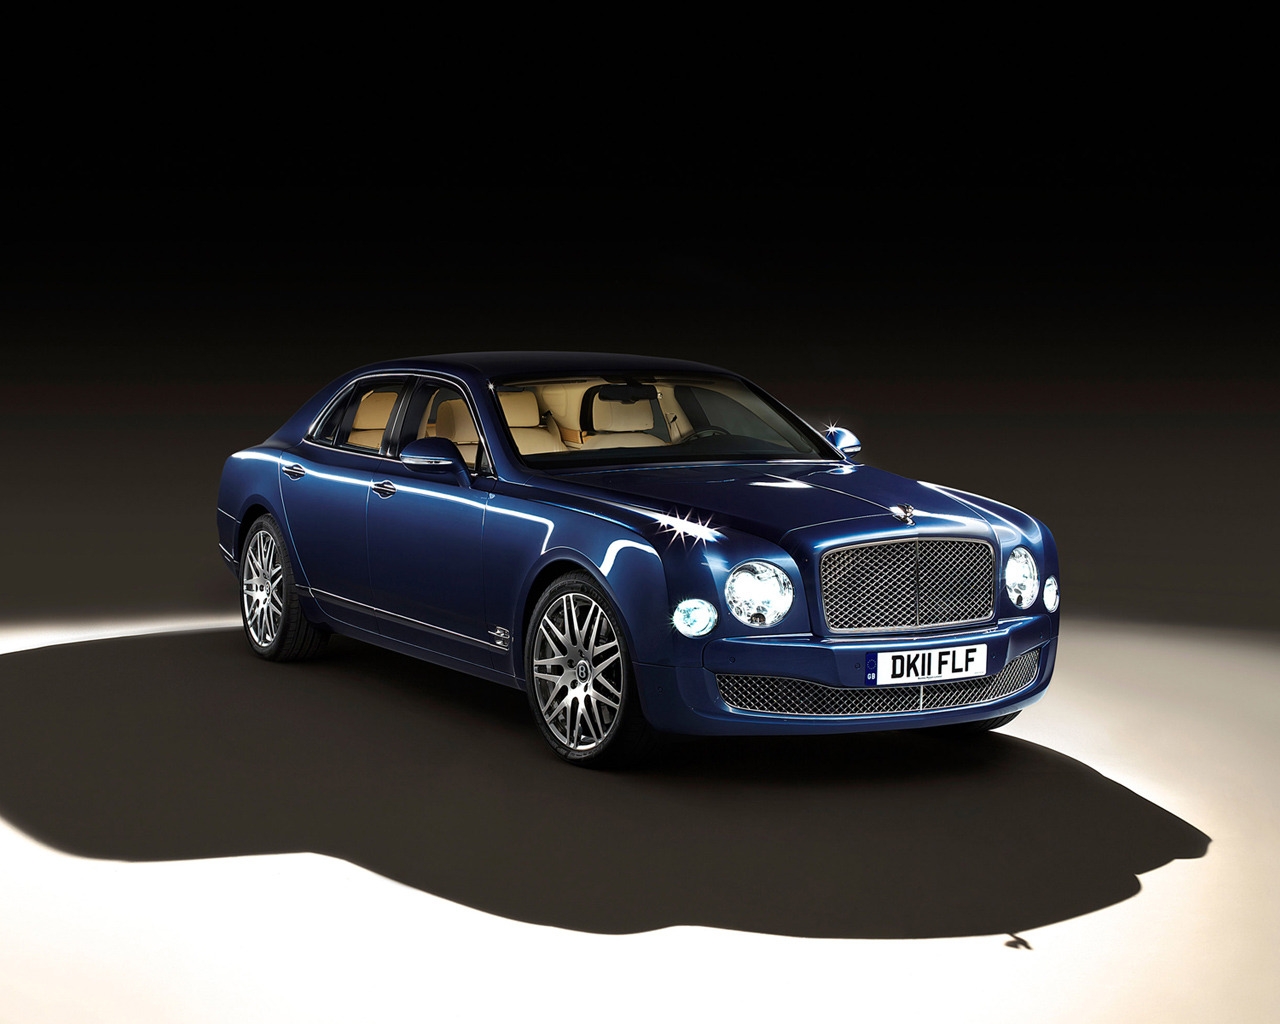 2012 Bentley Mulsanne Executive for 1280 x 1024 resolution